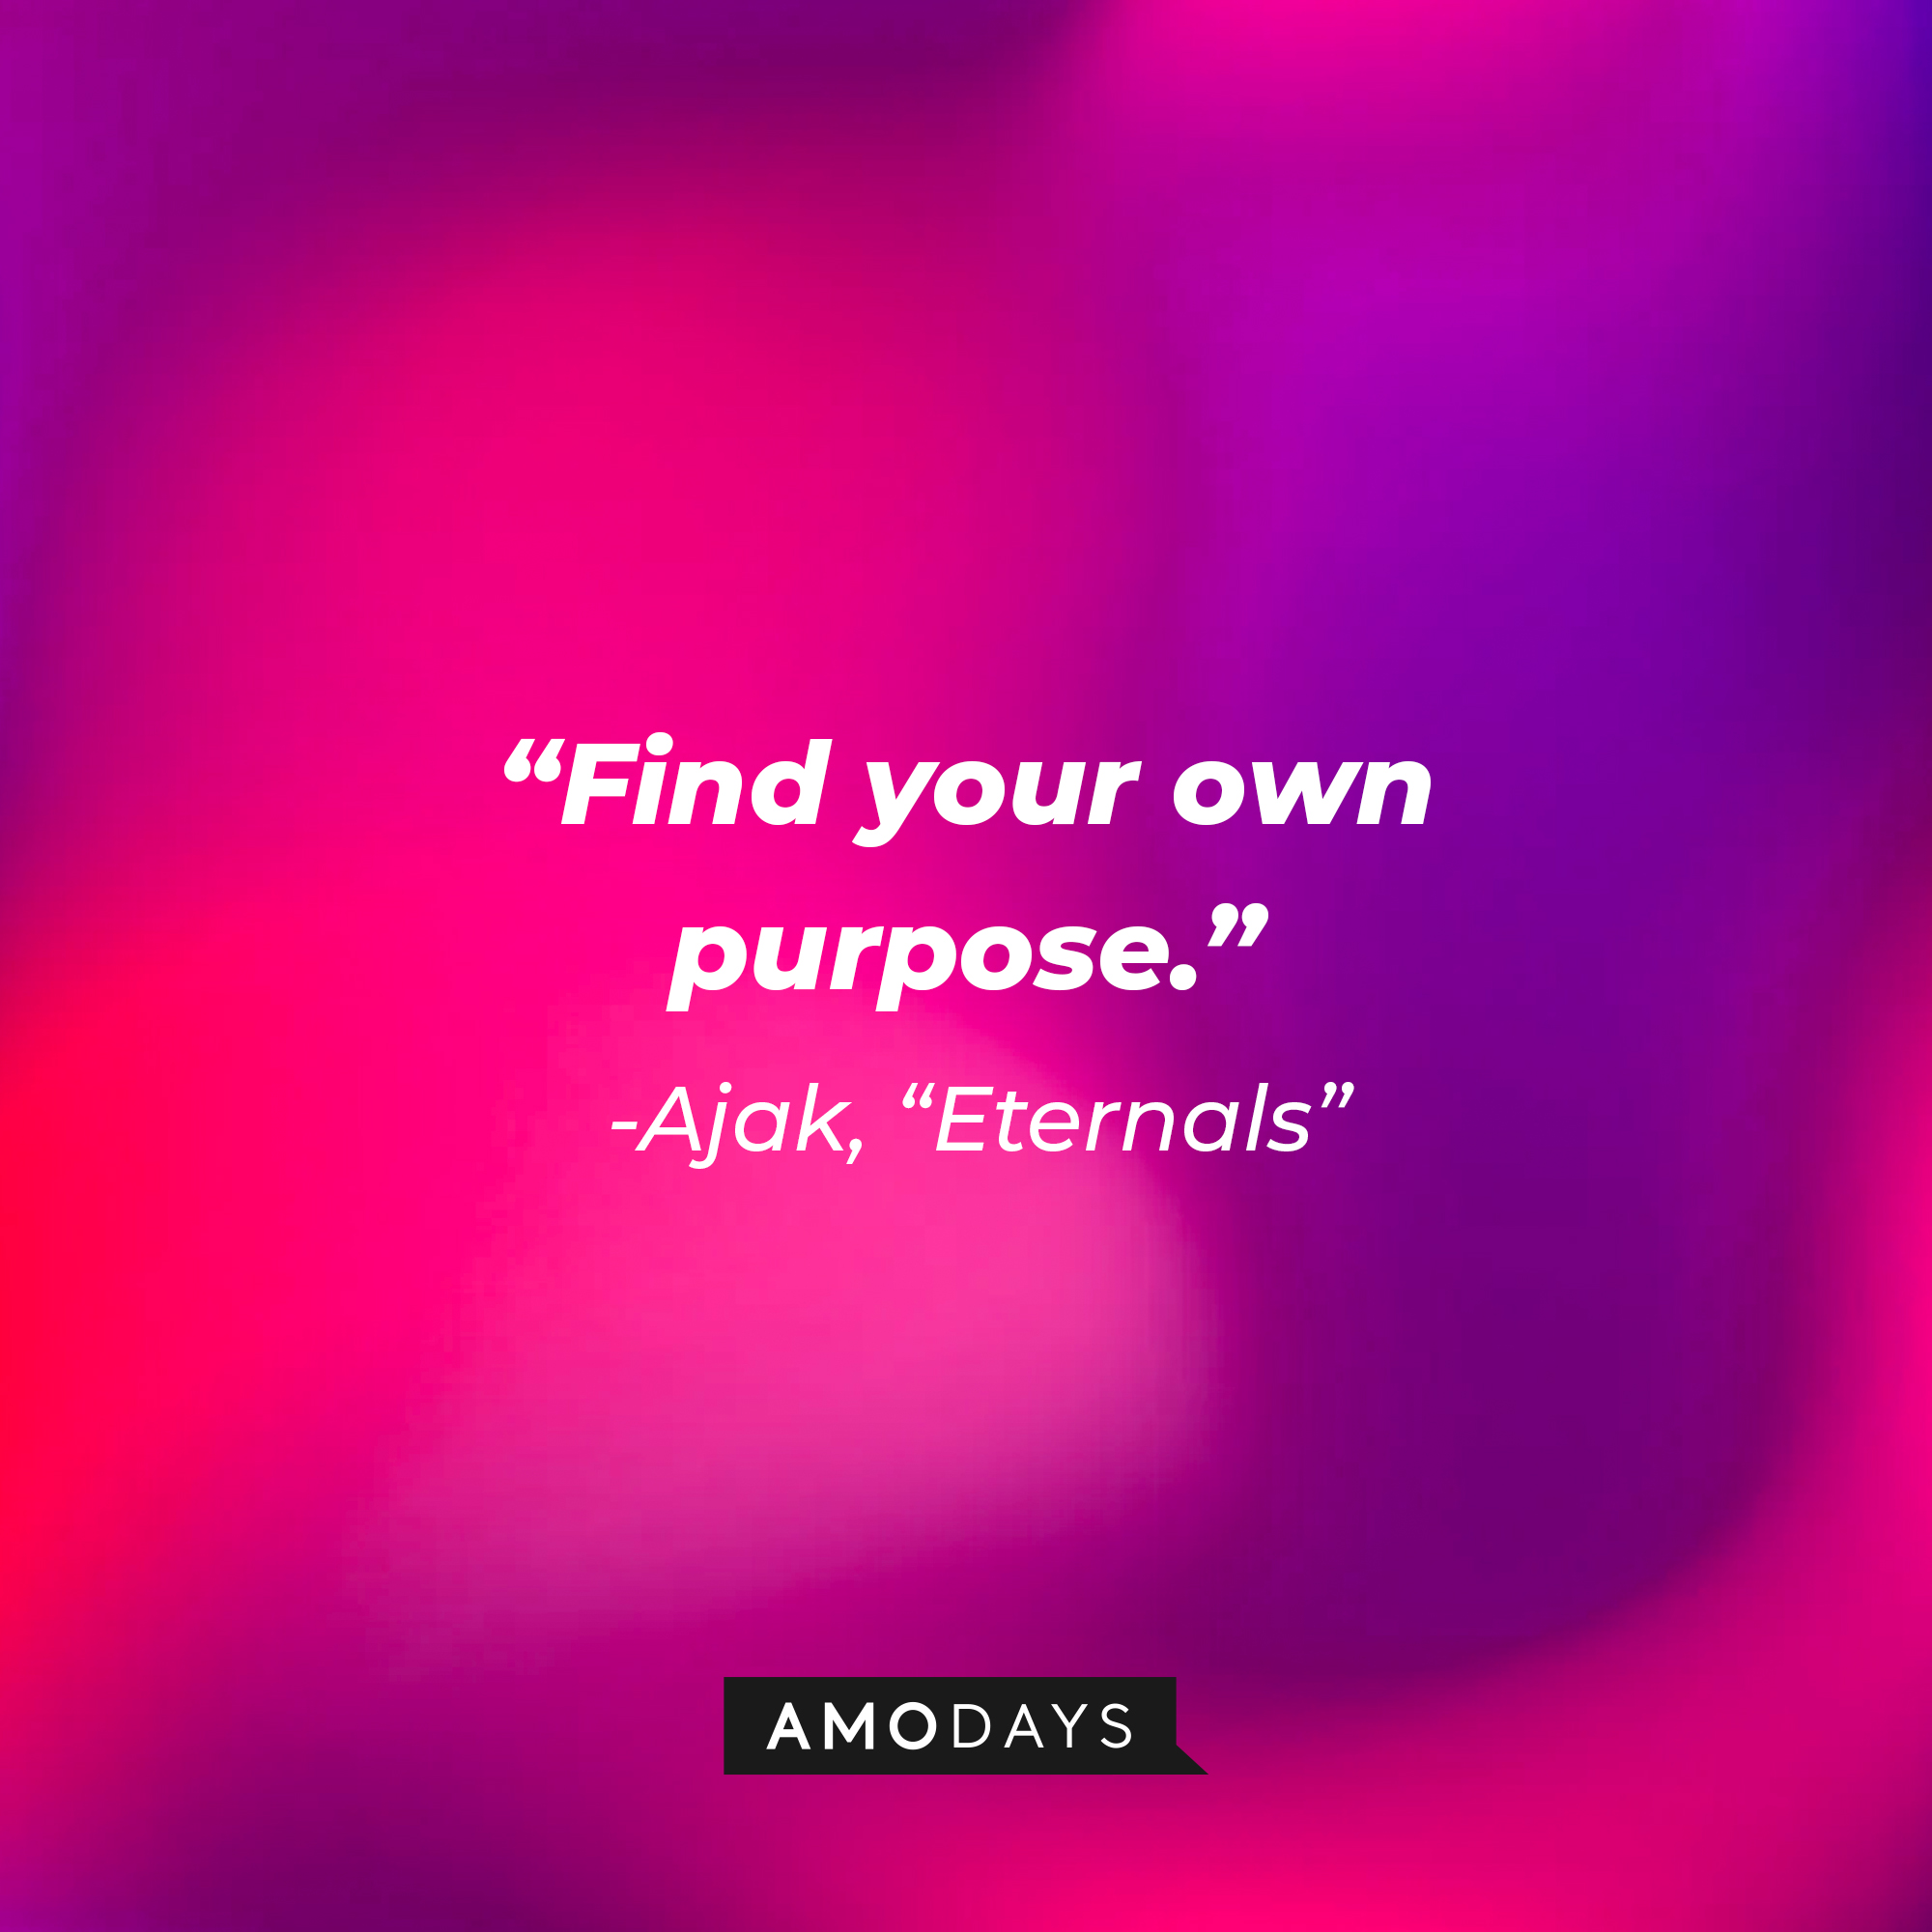 Ajak‘s quote "Find your own purpose." | Image: AmoDays